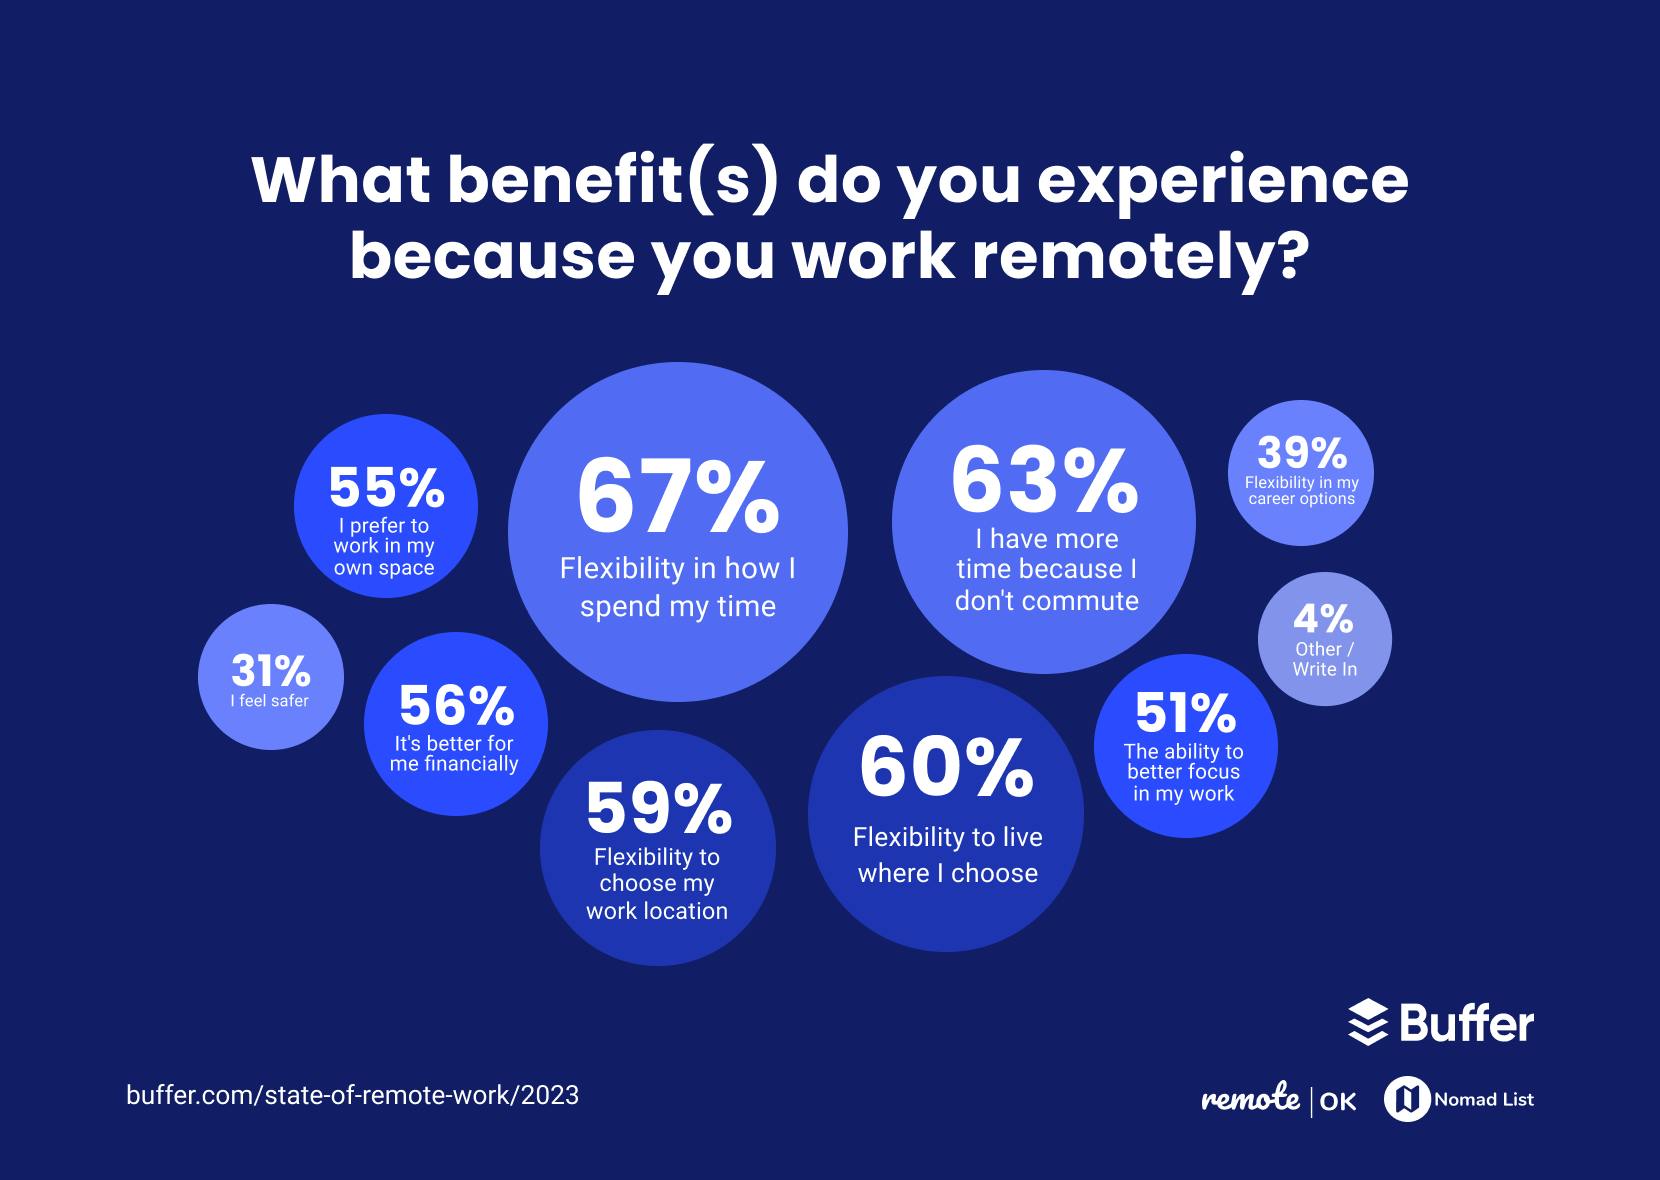 10 Remote, Work-From-Home Jobs, No Experience Needed